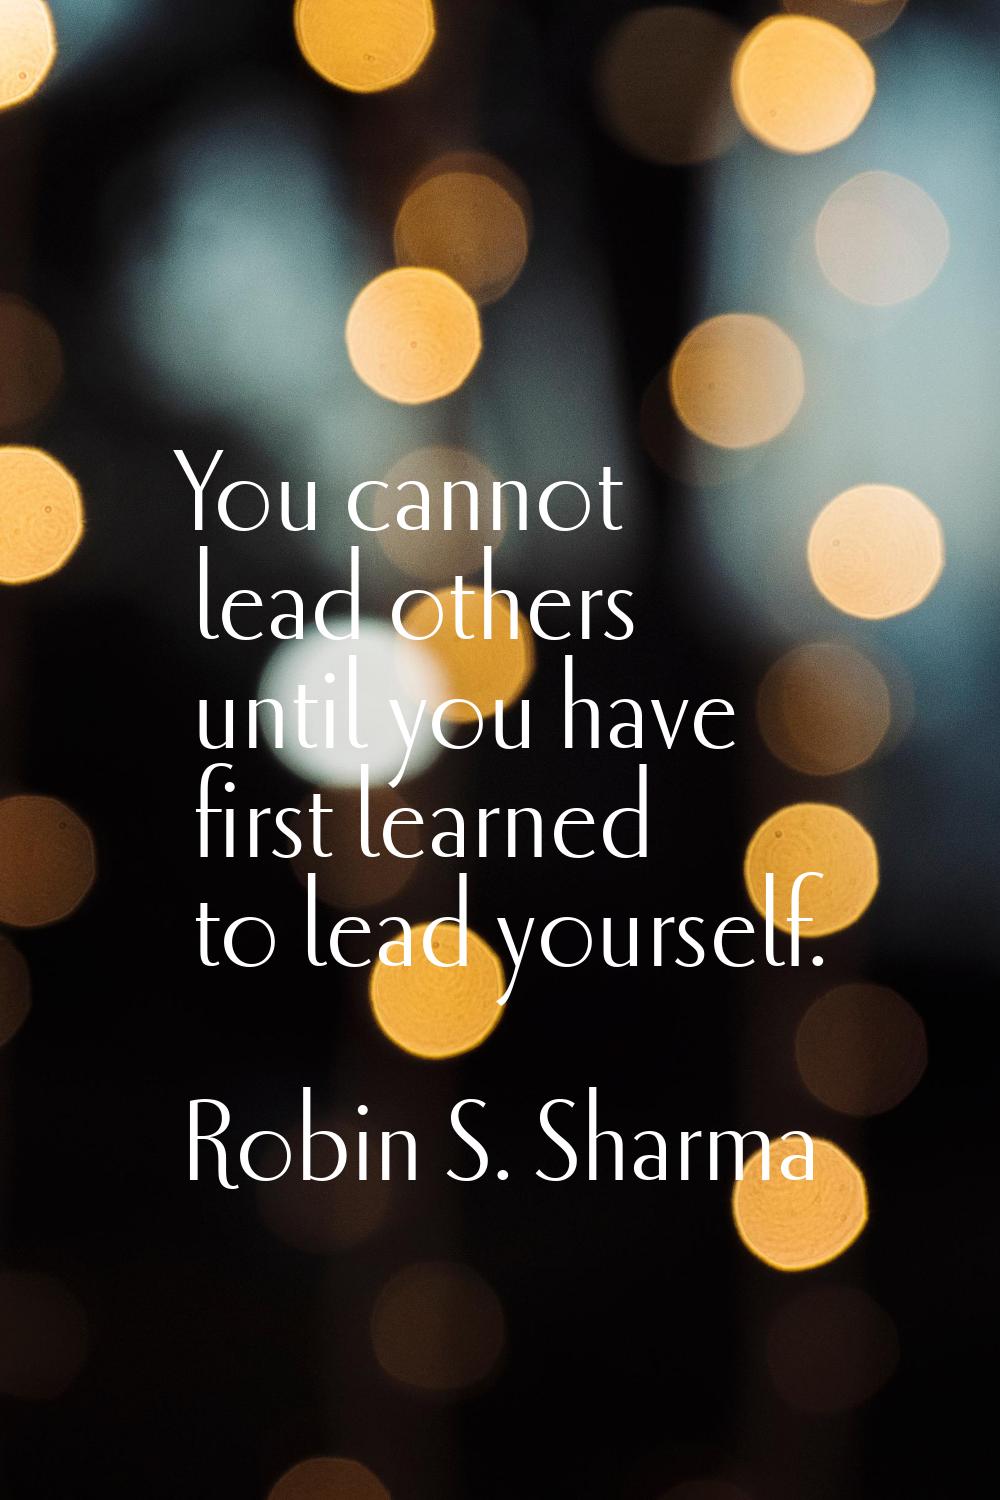 You cannot lead others until you have first learned to lead yourself.